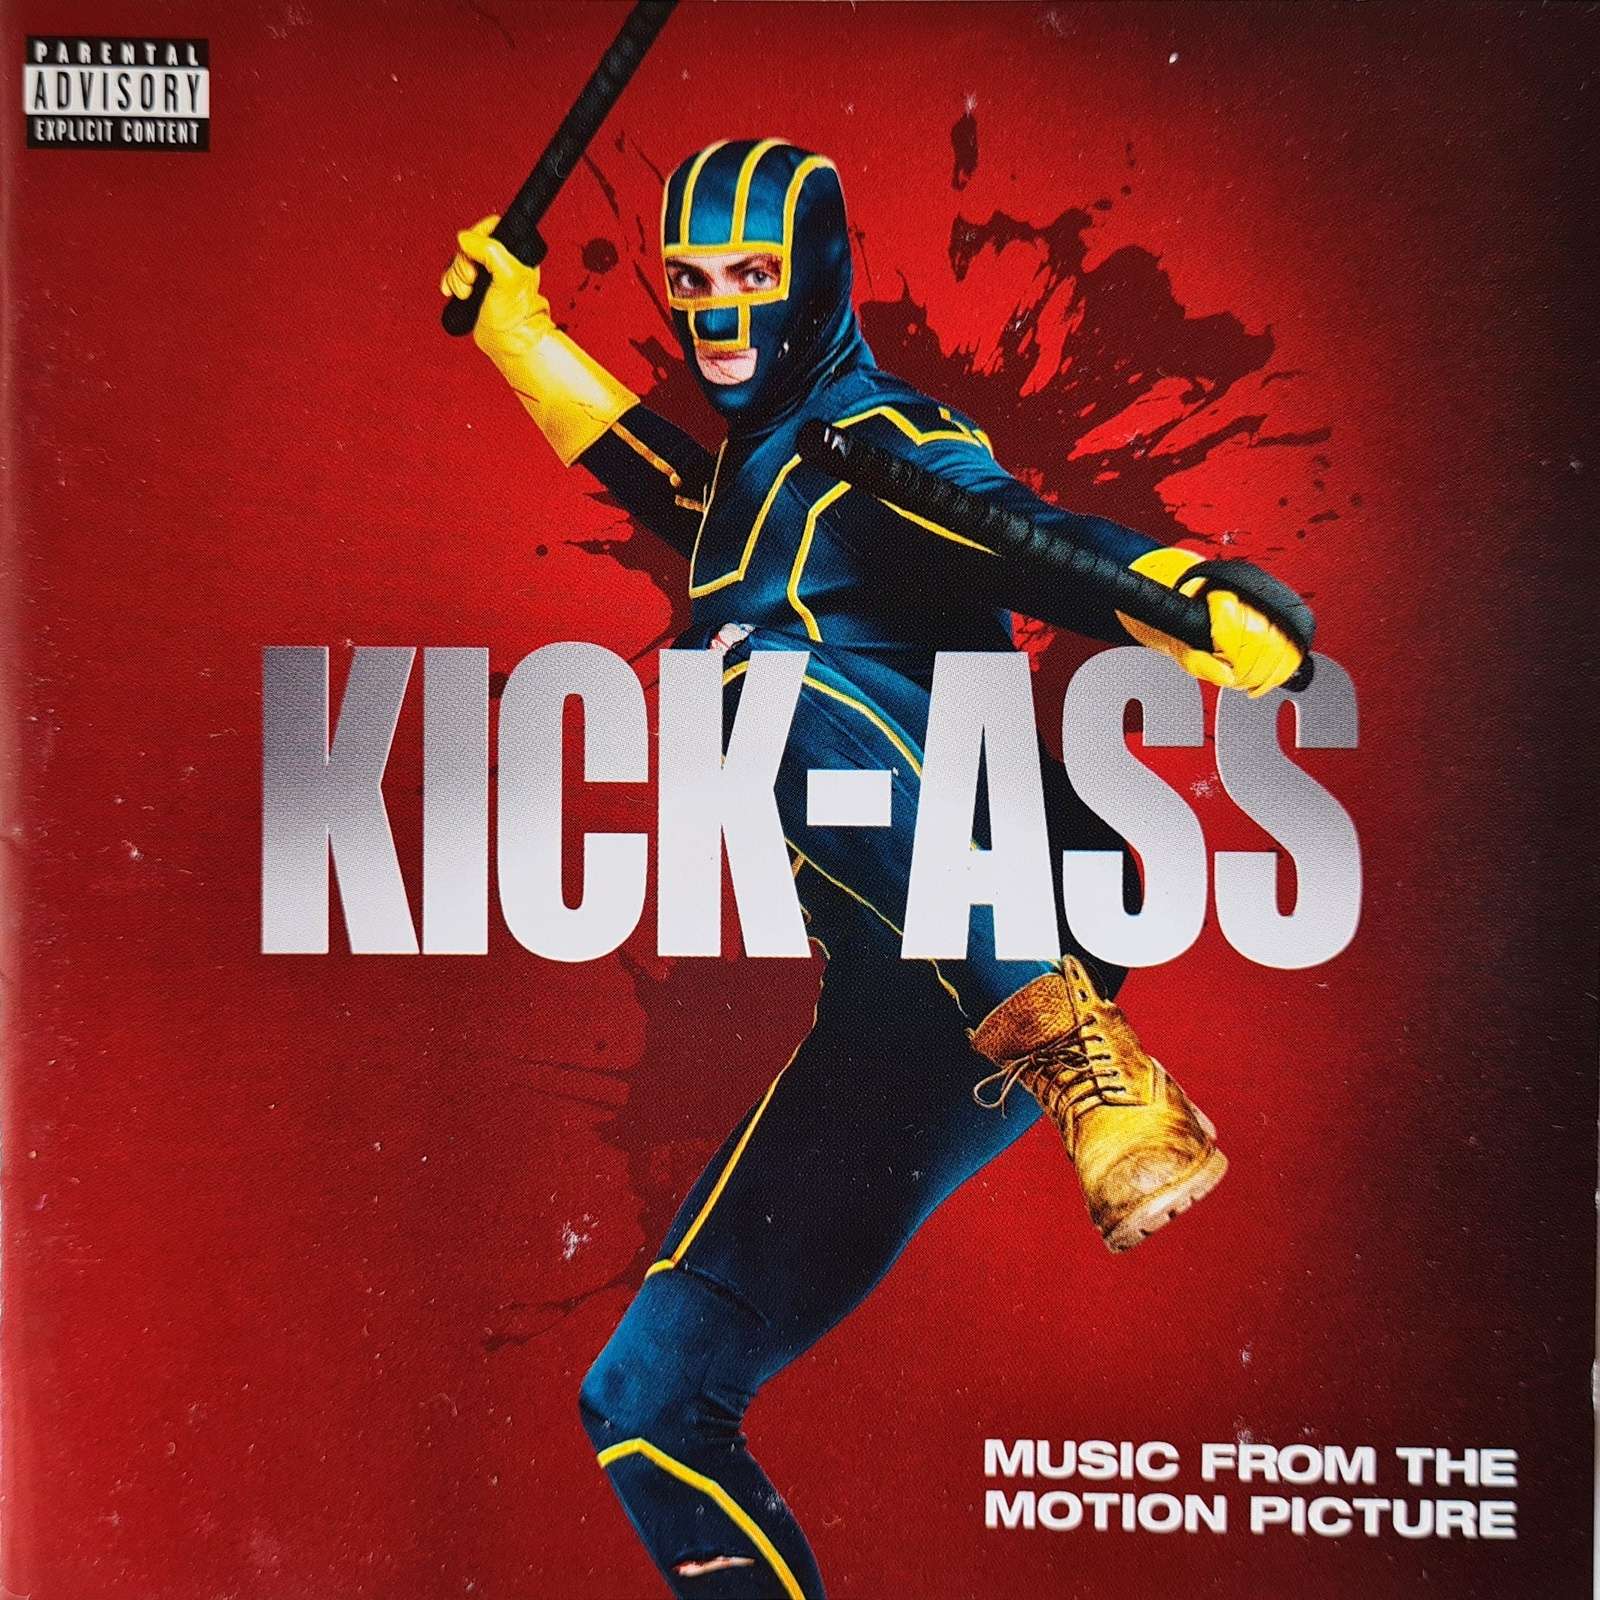 Kick-ass - Music from the Motion Picture (CD)